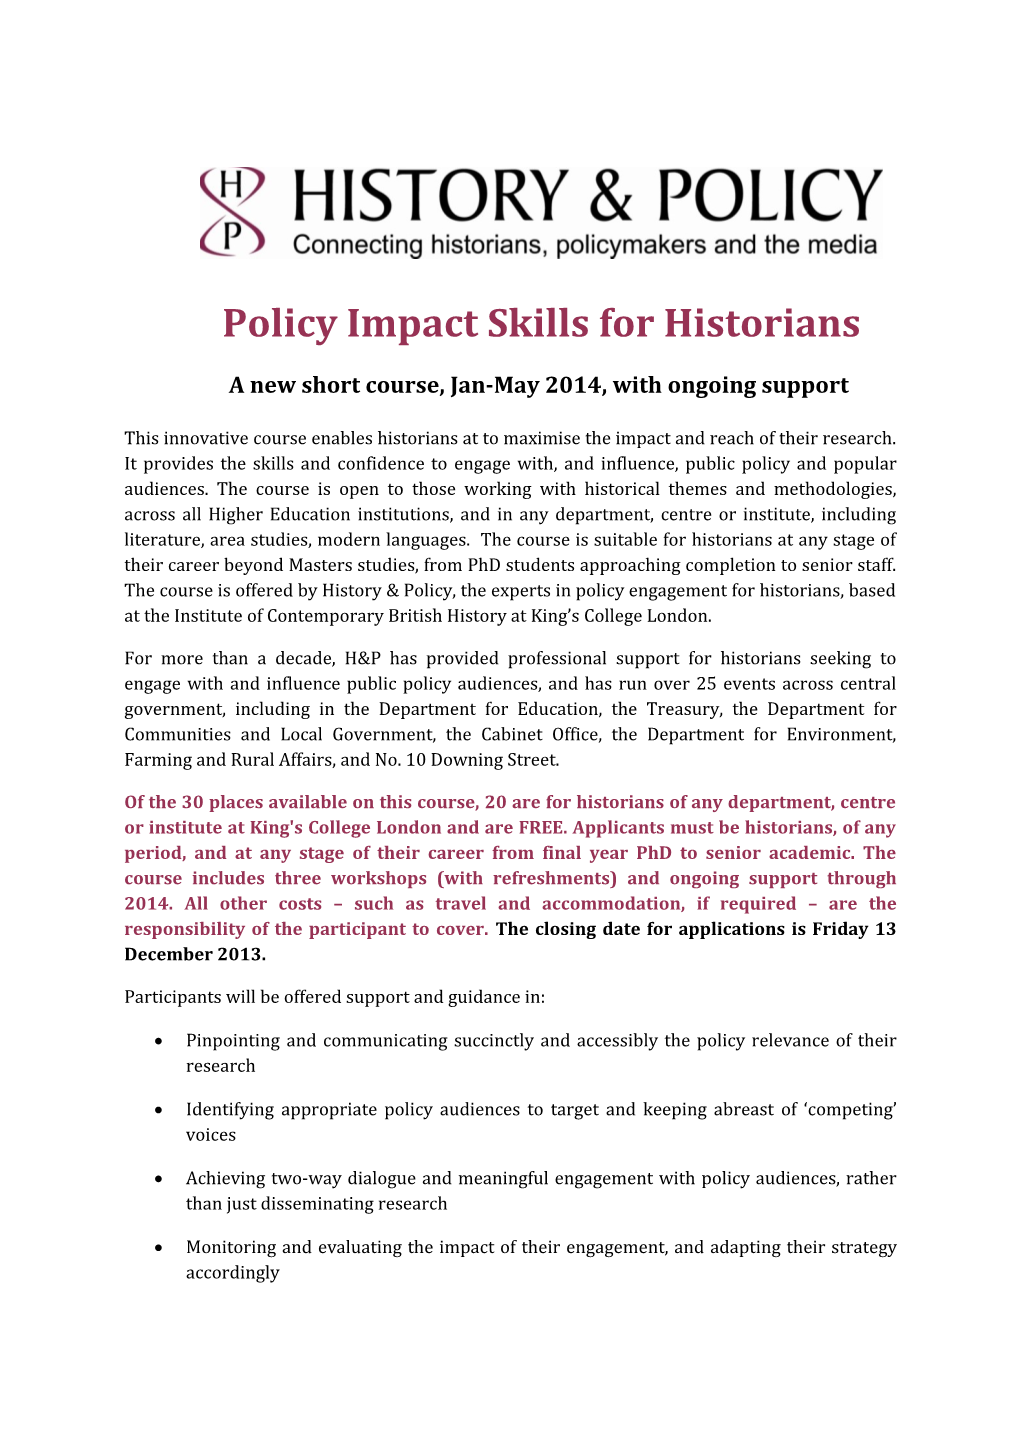 Policy Impact Skills for Historians